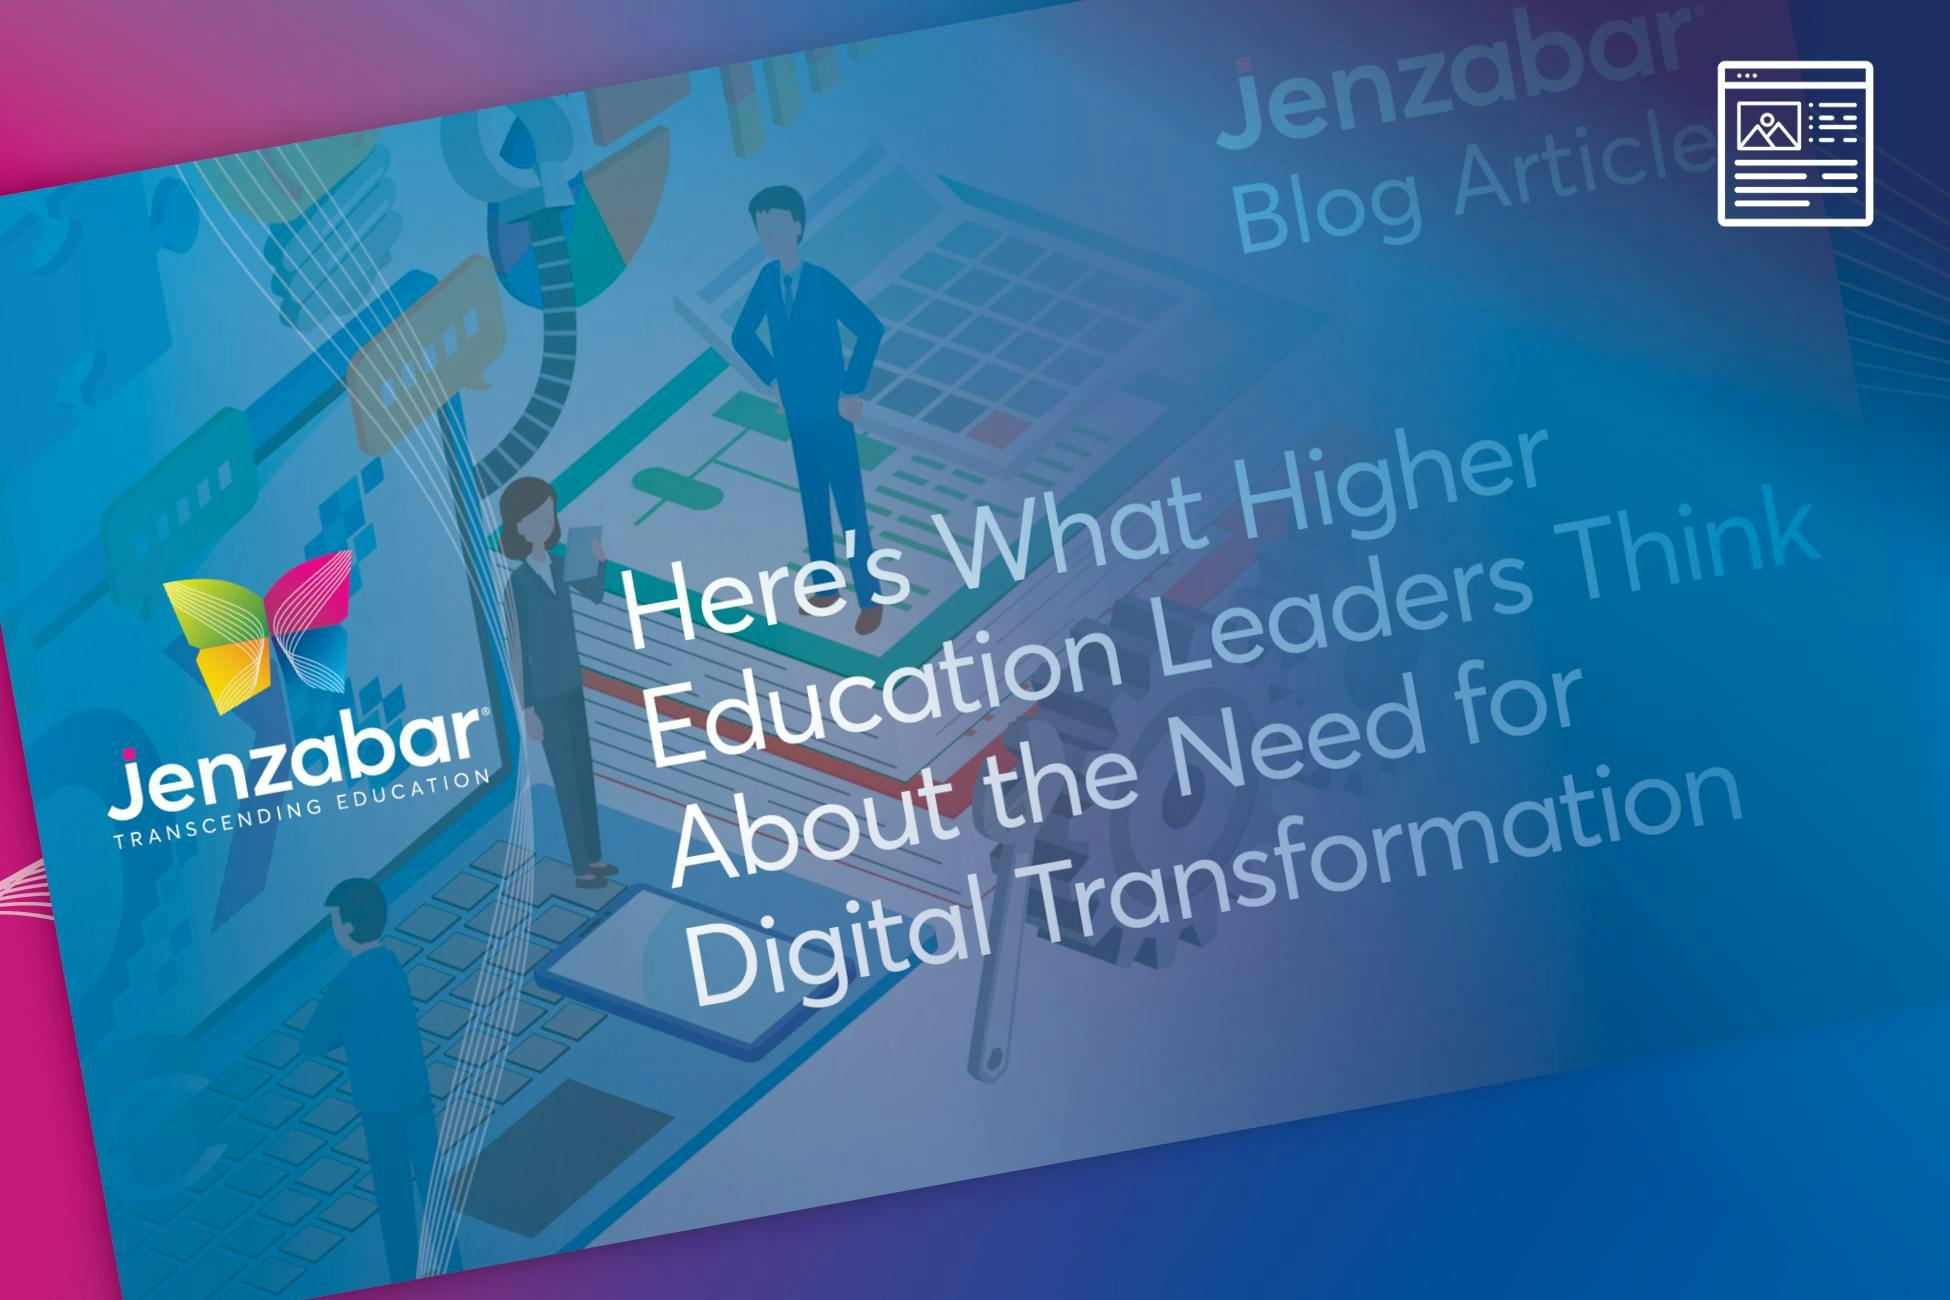 Blog: Here Is what Higher Education Leaders Think About the Need for Digital Transformation